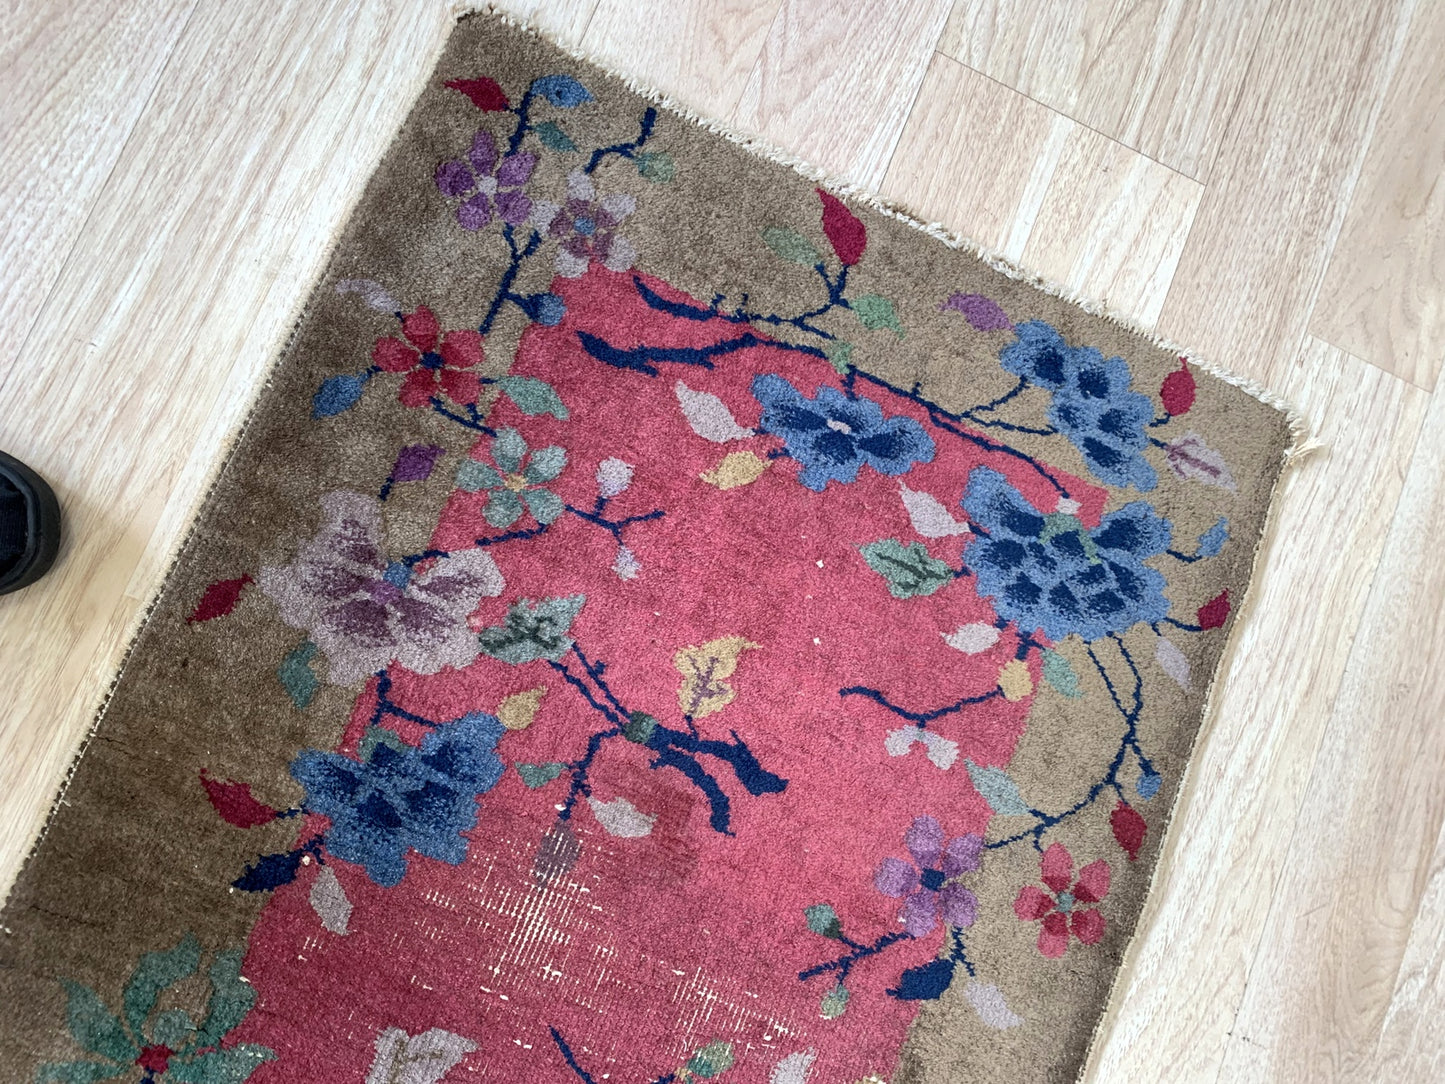 Authentic Chinese rug with large flowers and intricate craftsmanship in Art Deco style.